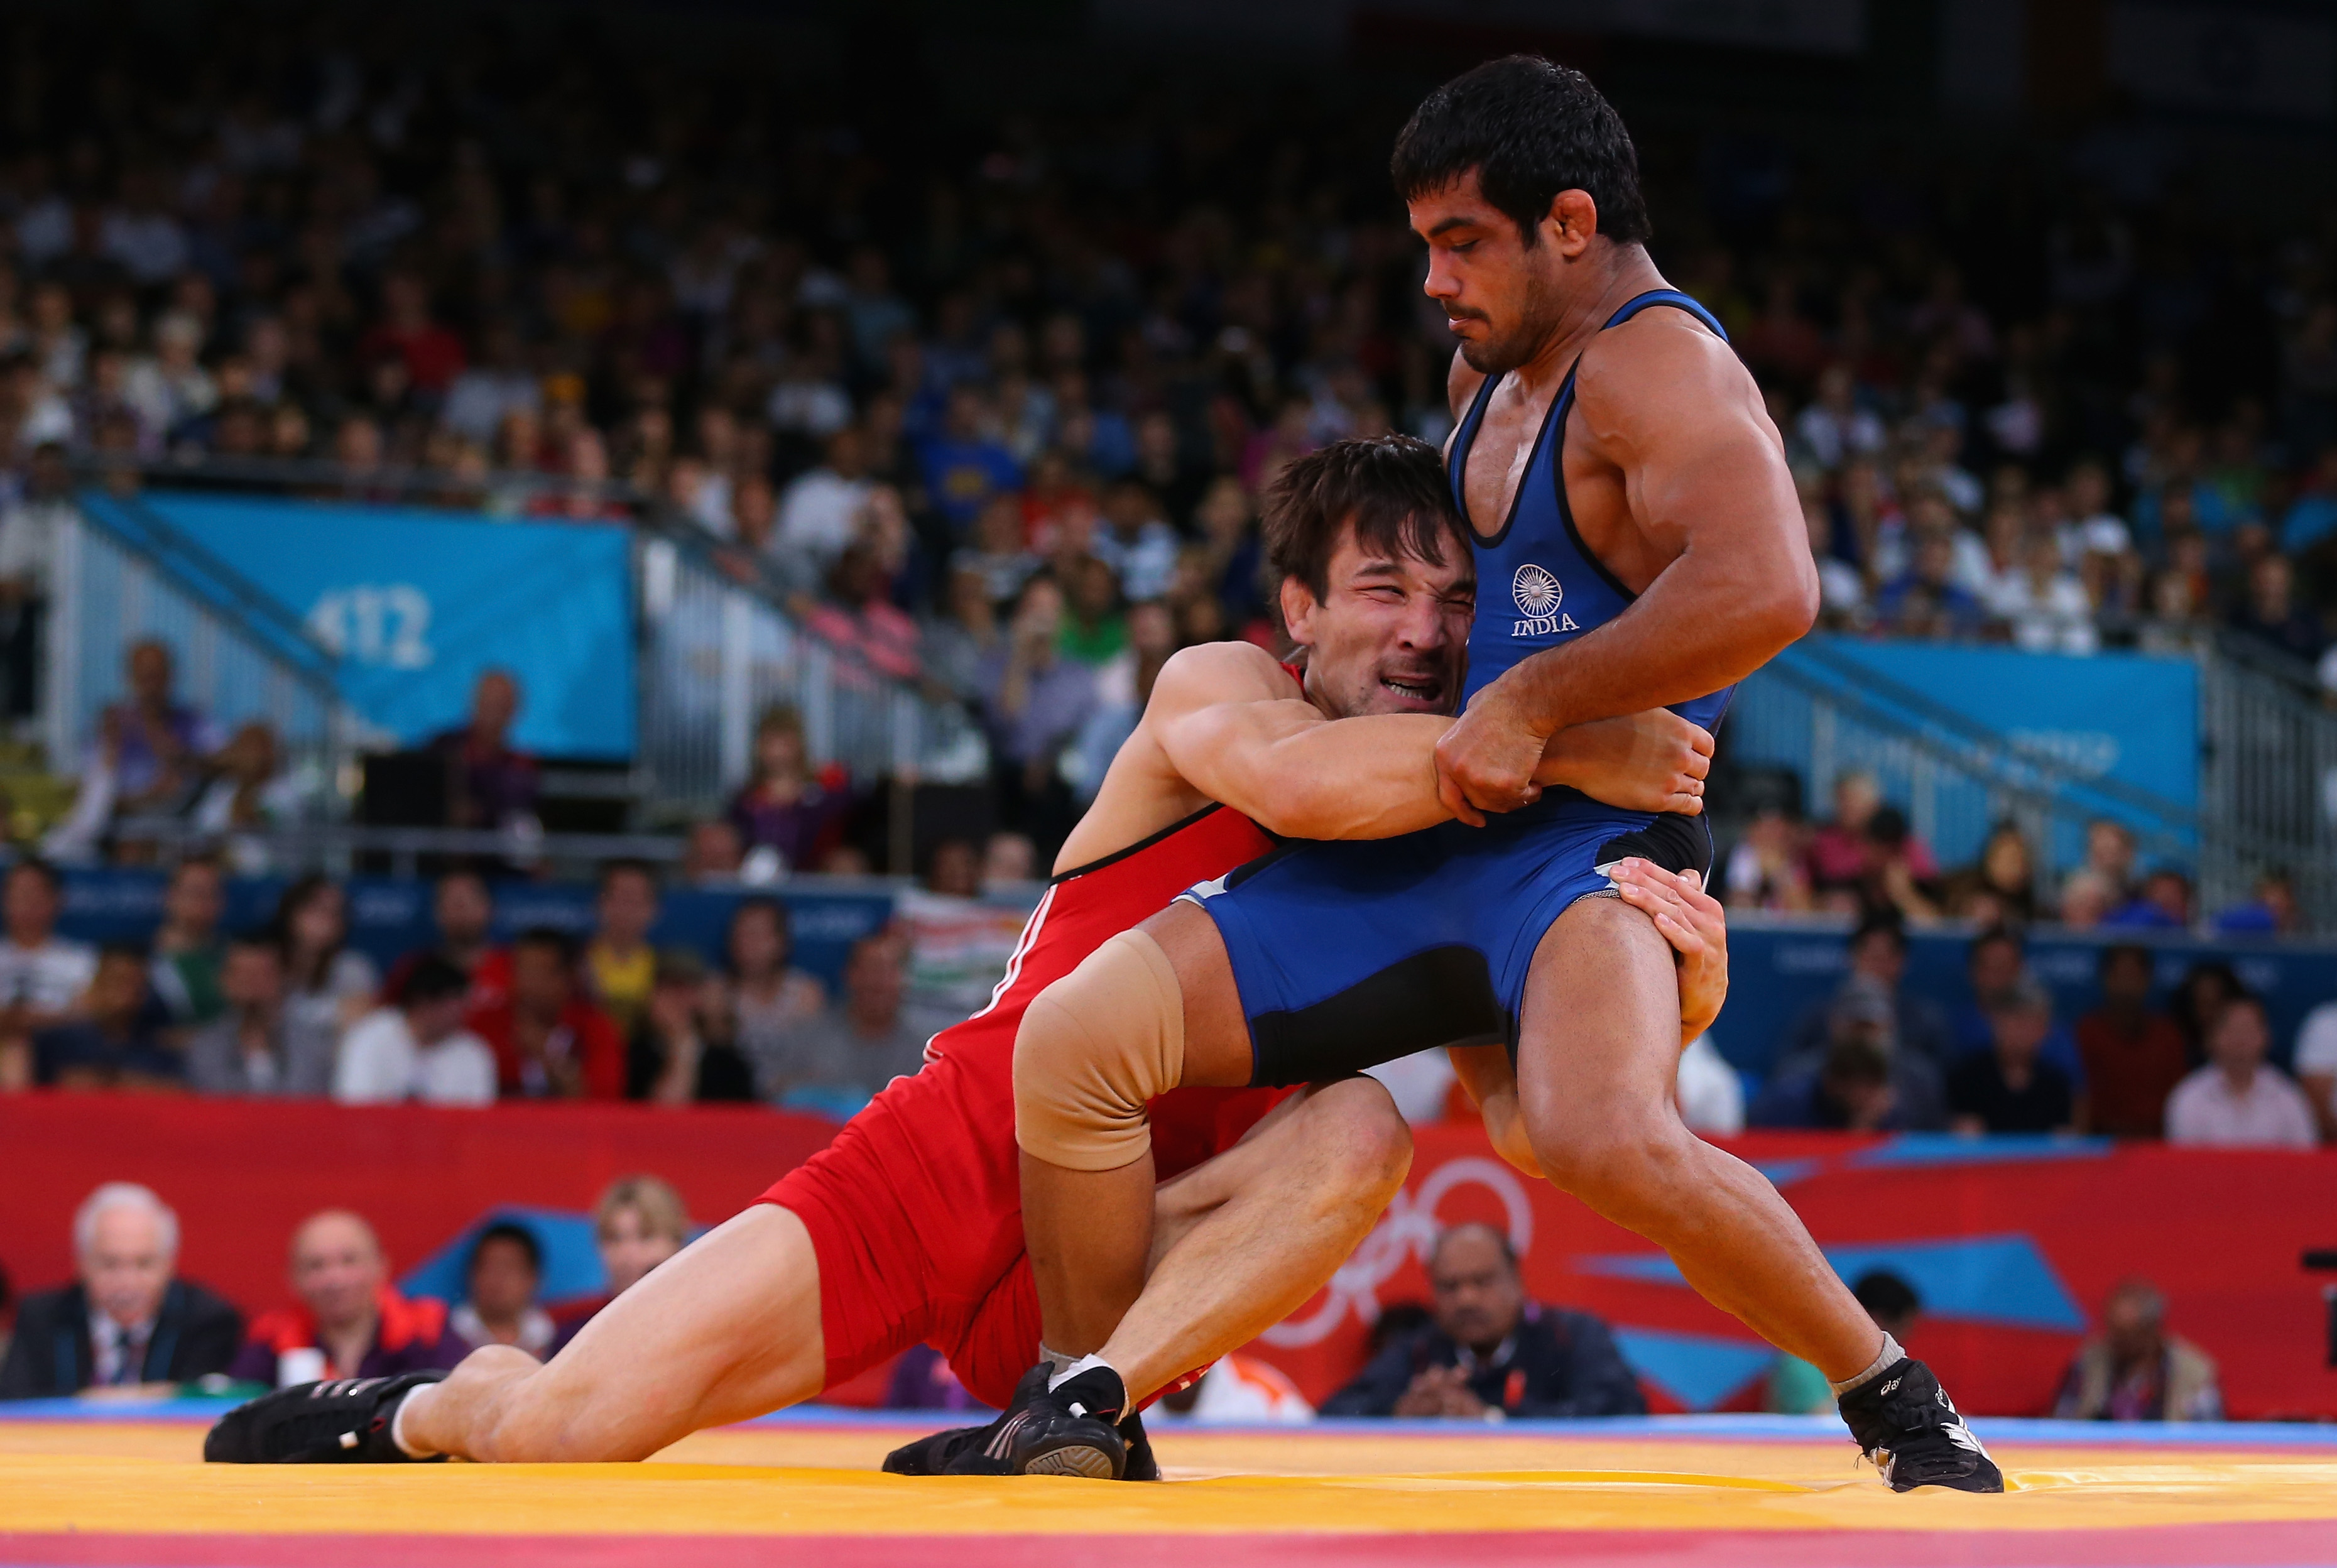 Was at World Championships to announce that I am getting back, says Sushil Kumar